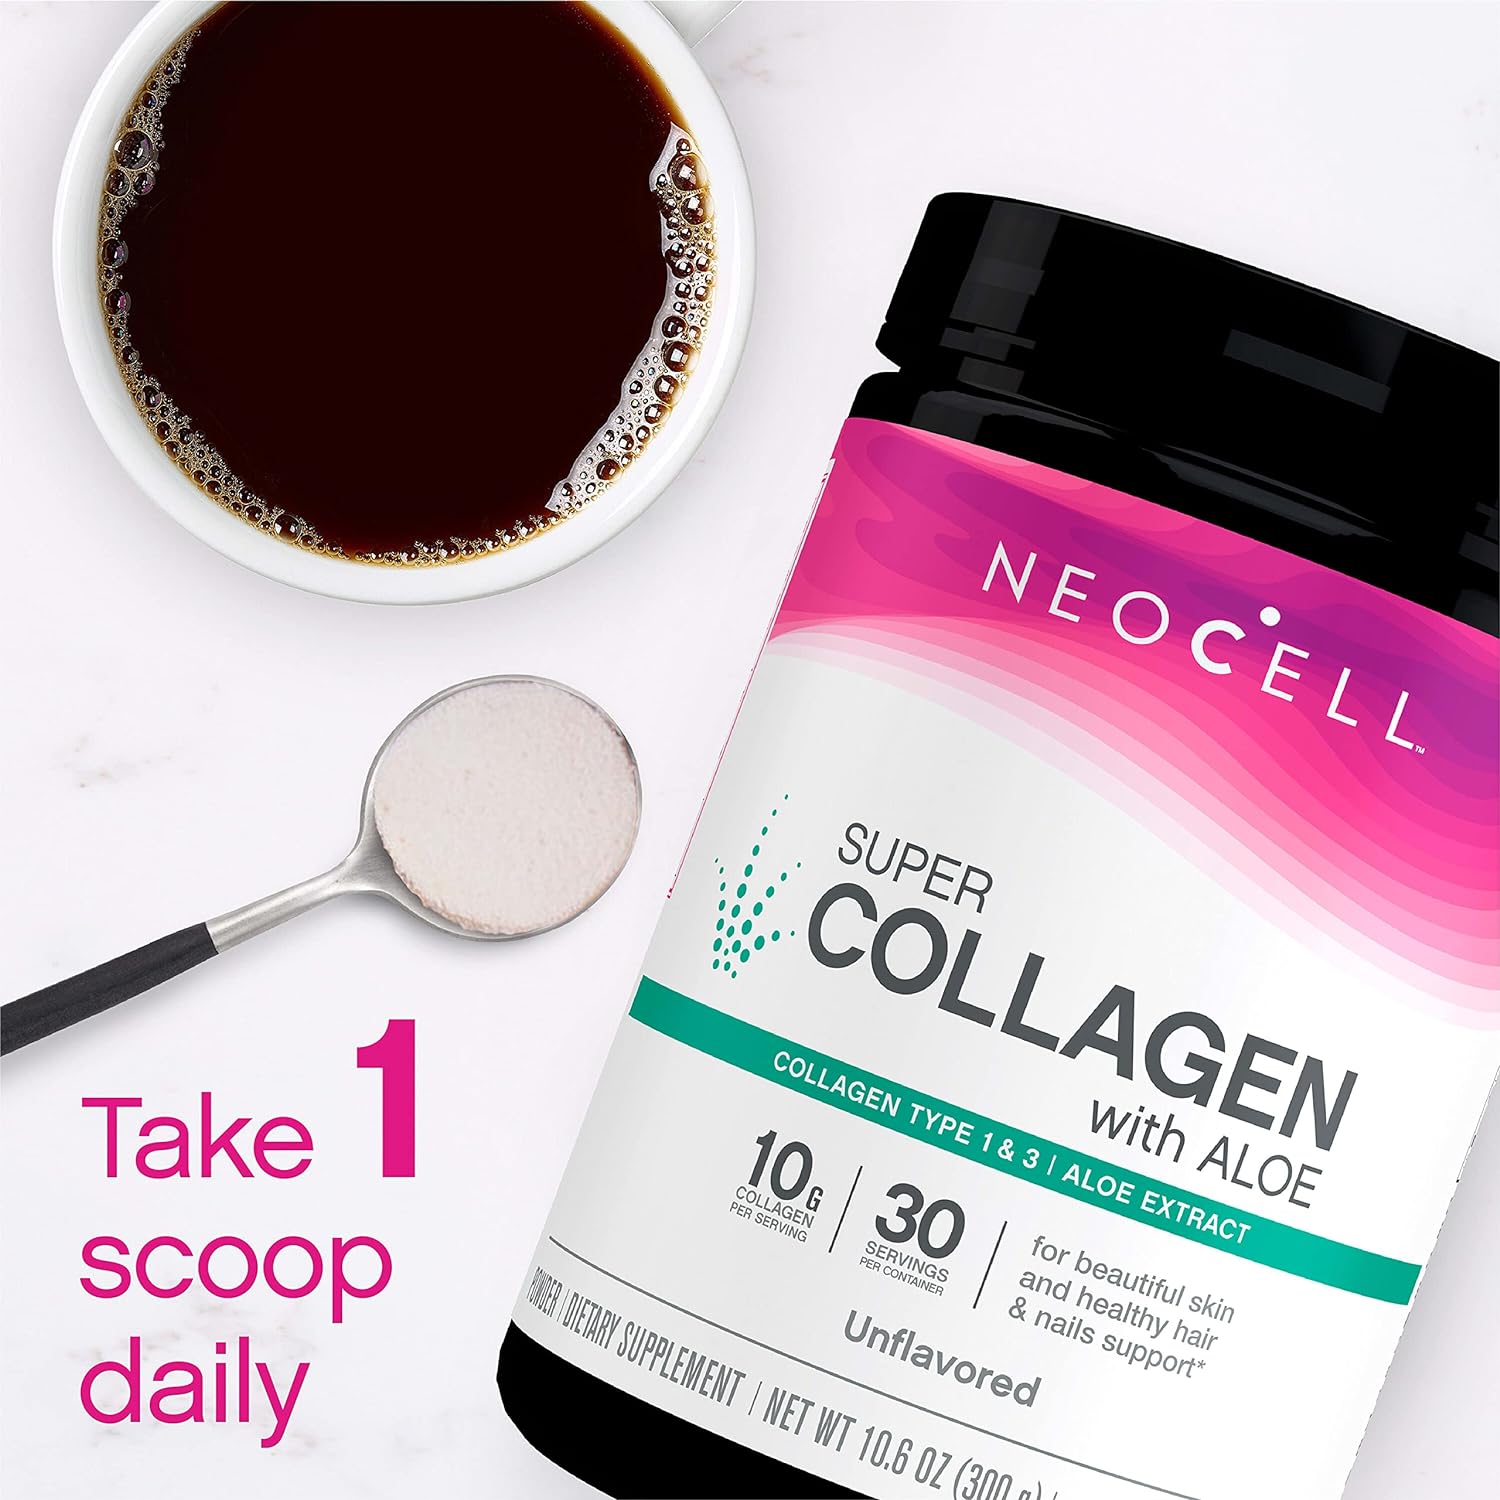 NeoCell Super Collagen with Aloe; Collagen Type 1 and 3; Supports Healthy Hair, Skin and Nails; Gluten Free; Unflavored Powder; 10 g Collagen/Serving; 30 Servings; 10.6 Oz,* : Health & Household